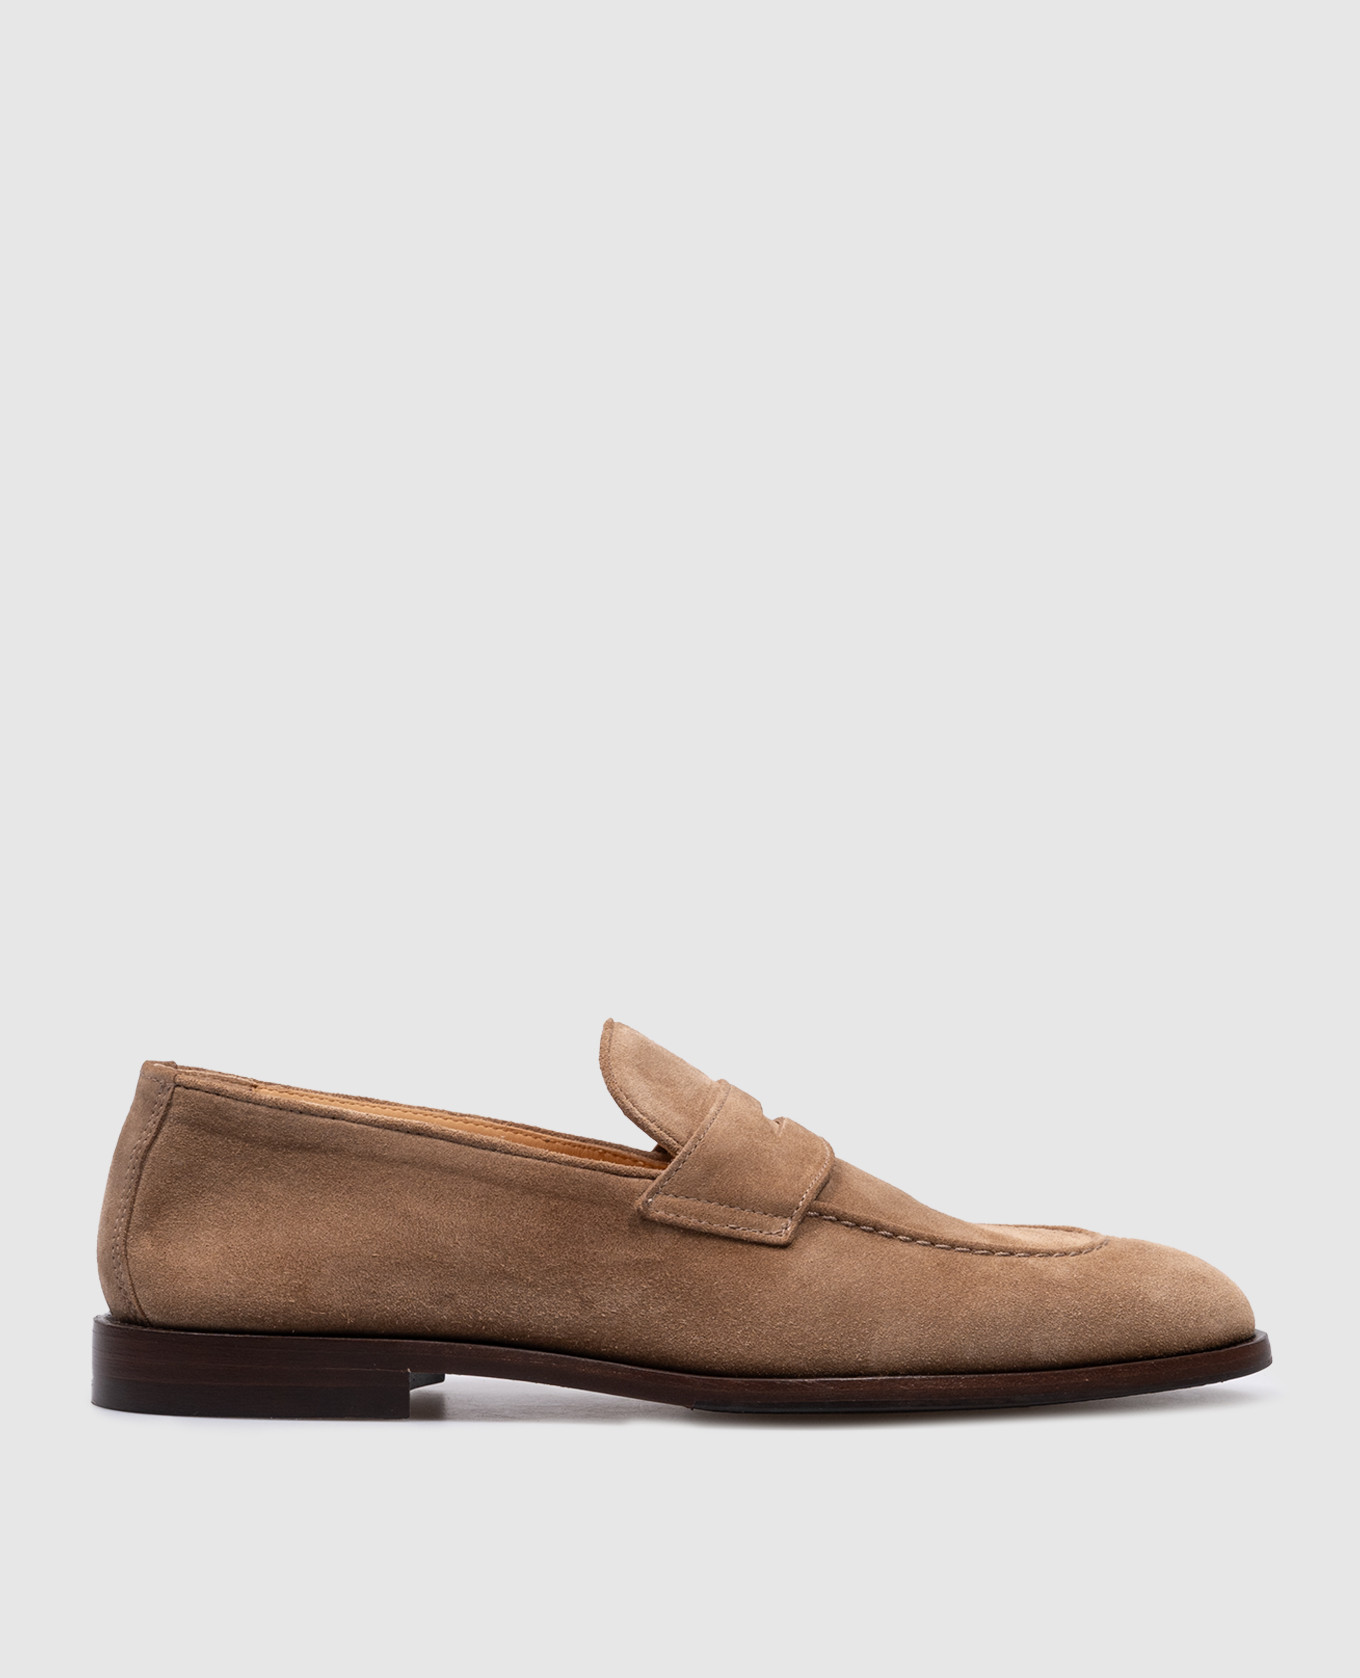 Brown suede classic loafers